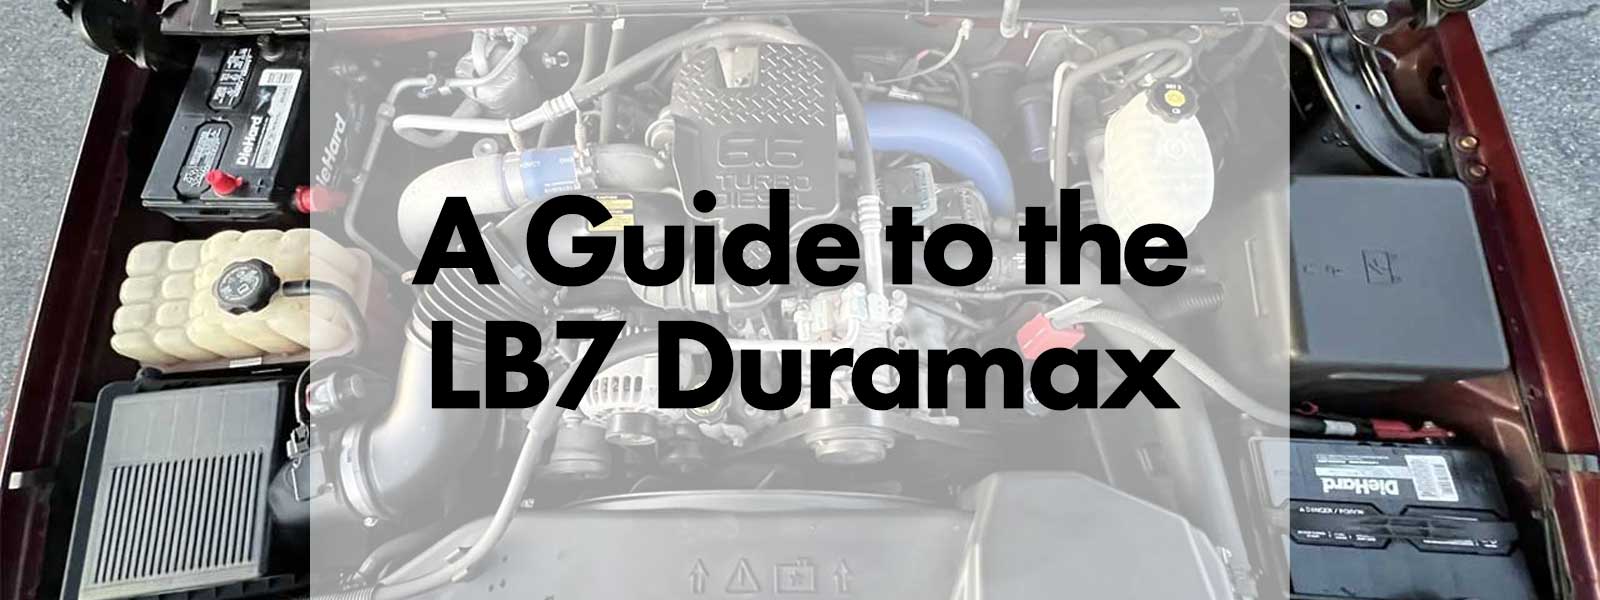 A Guide to the LB7 Duramax